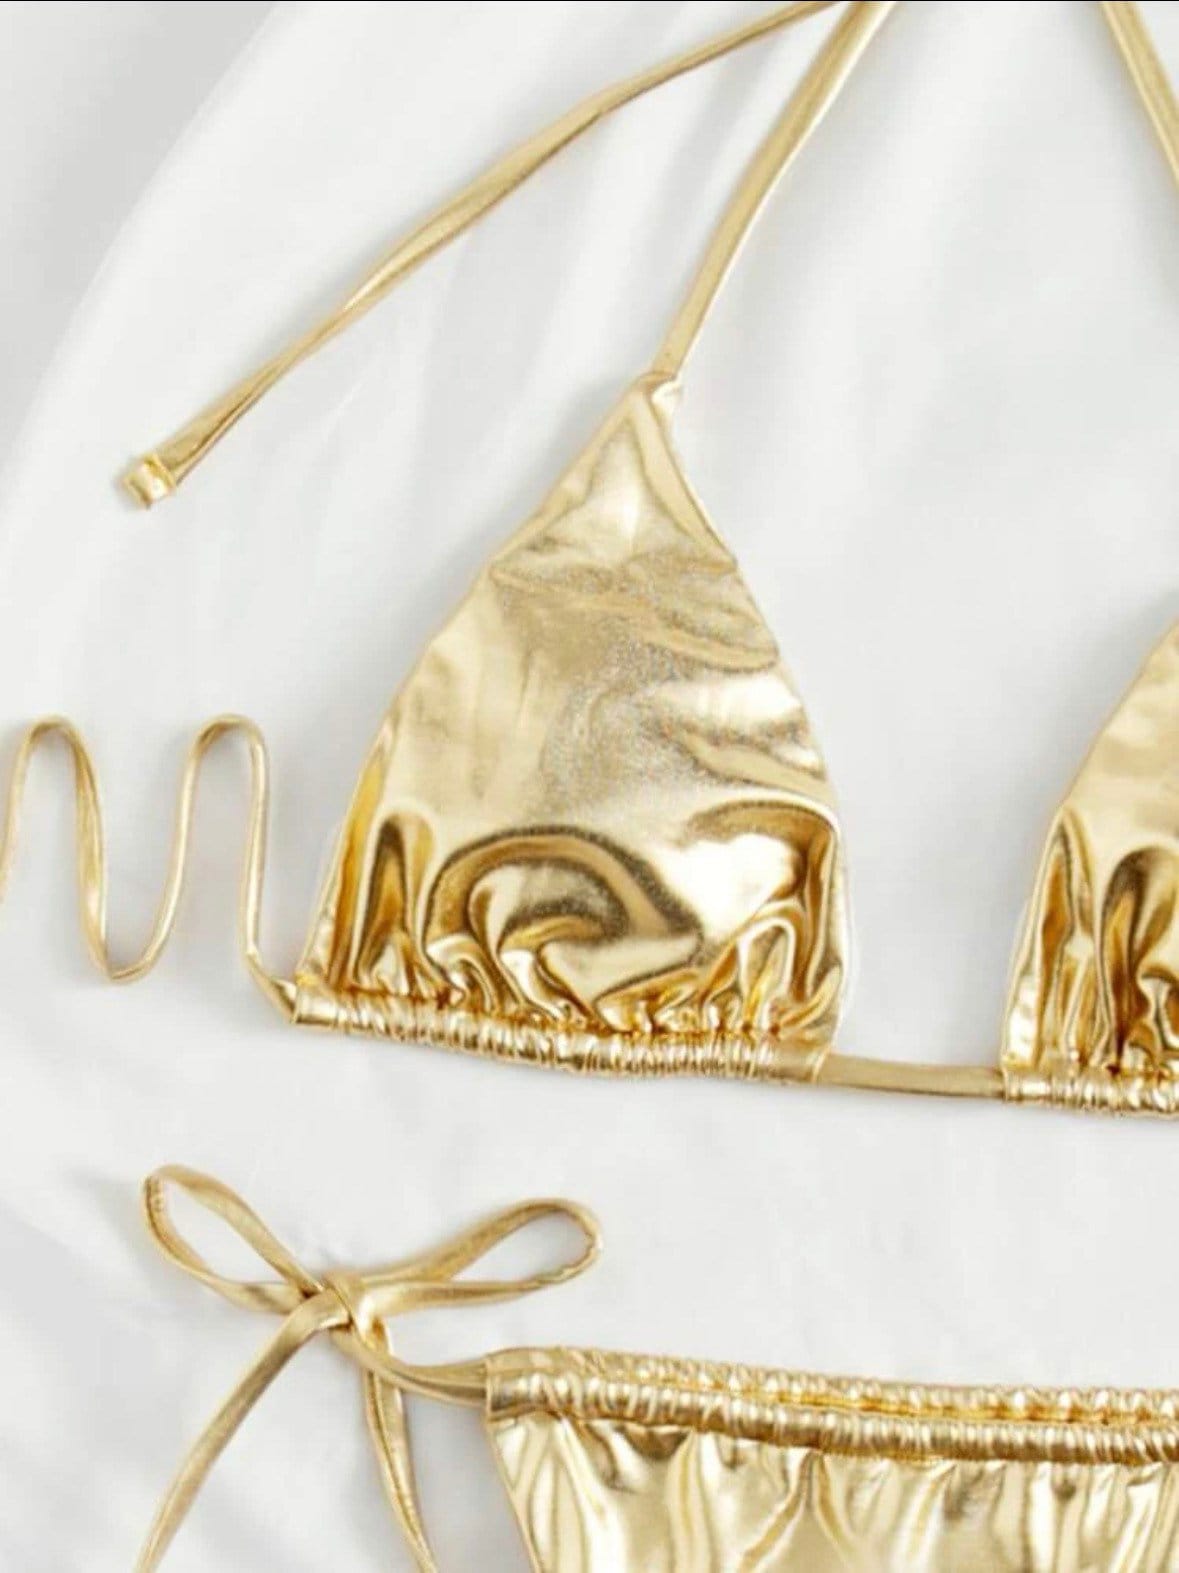 The Metallic gold swim bikini with tie sides and solid metallic gold print triangle halter top tie and bottoms swimsuit set